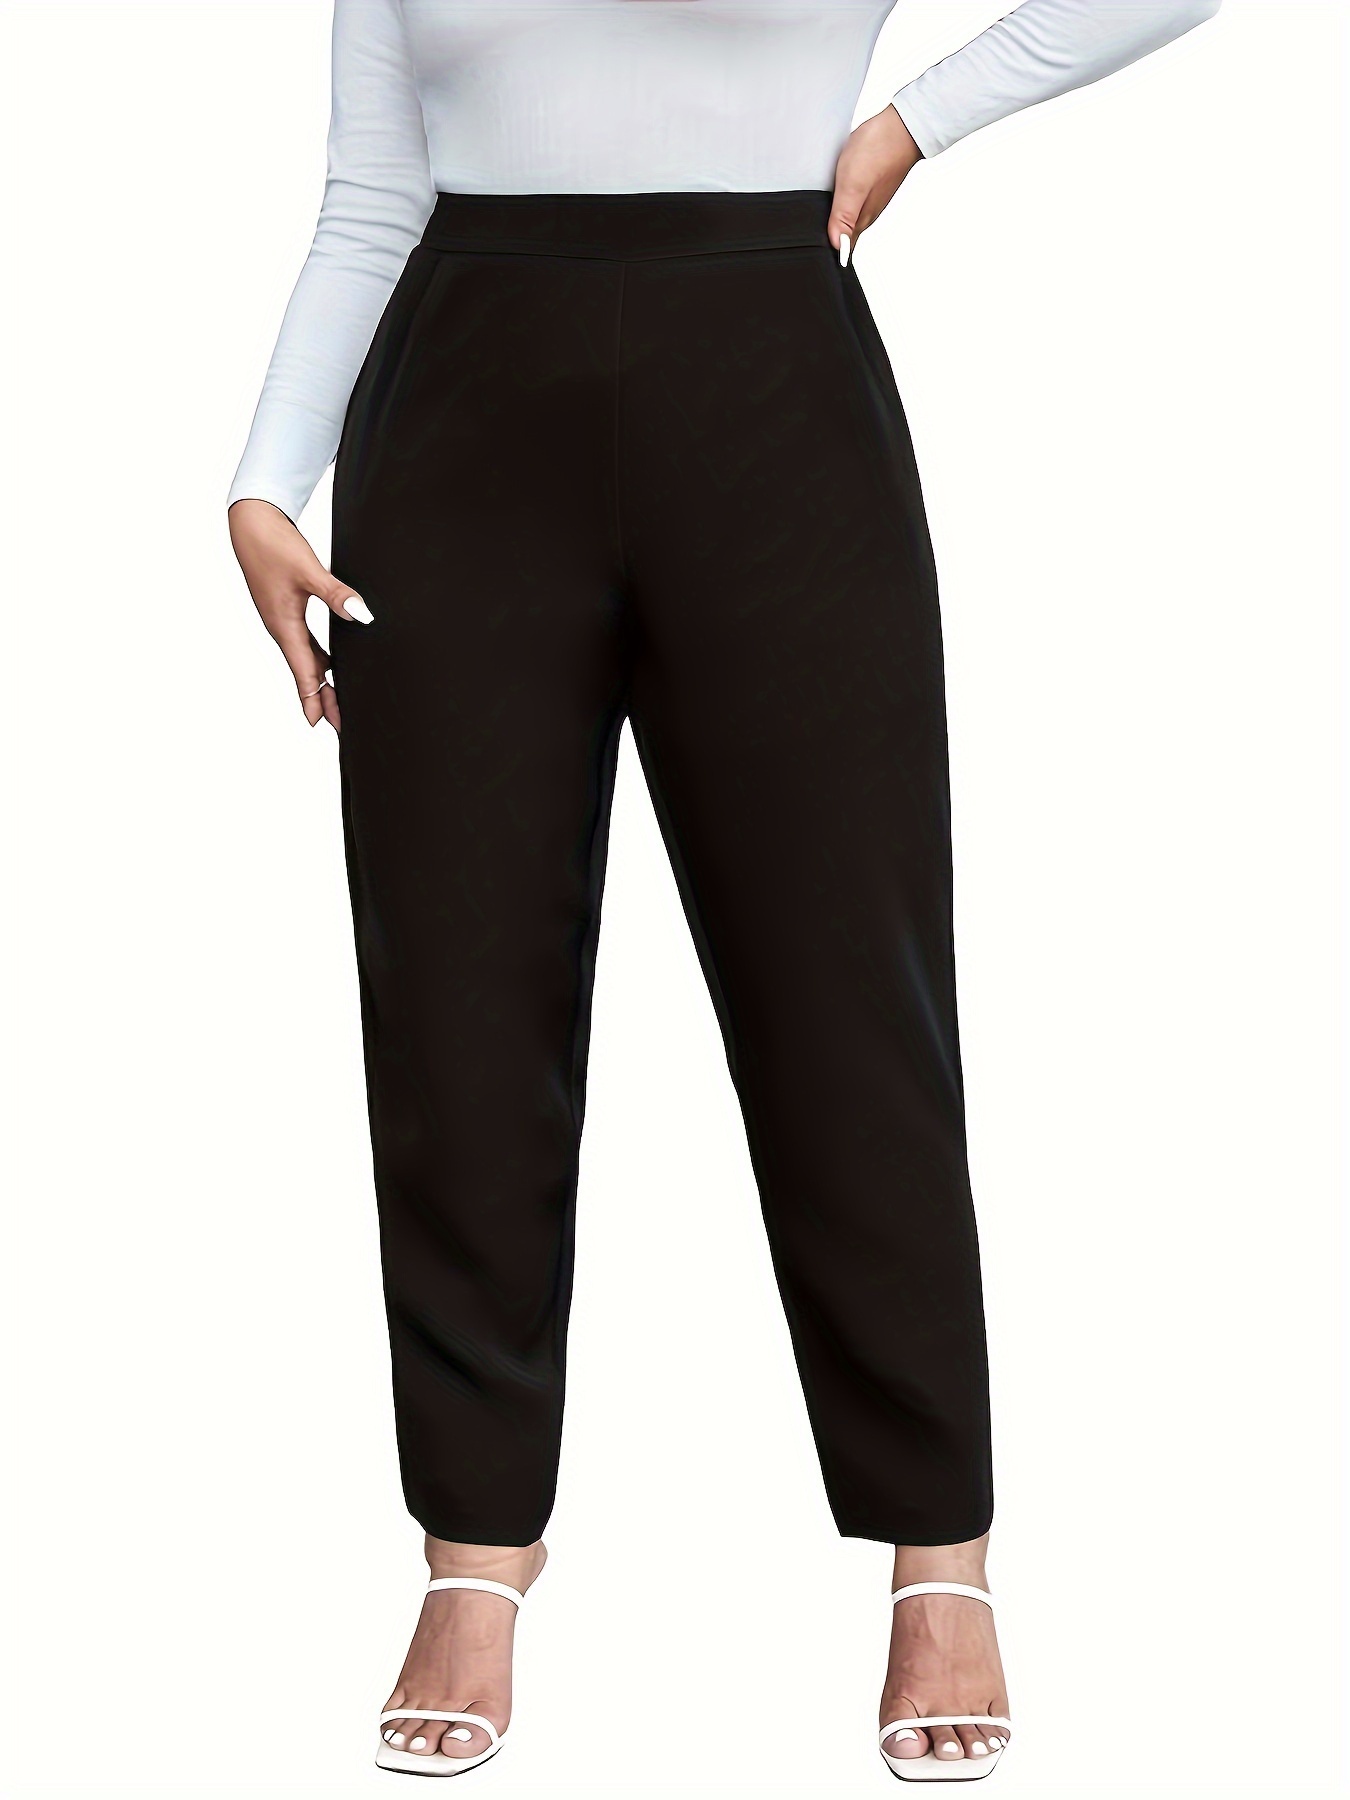 Plus Size Black At Least 20% Sustainable Material Pants.